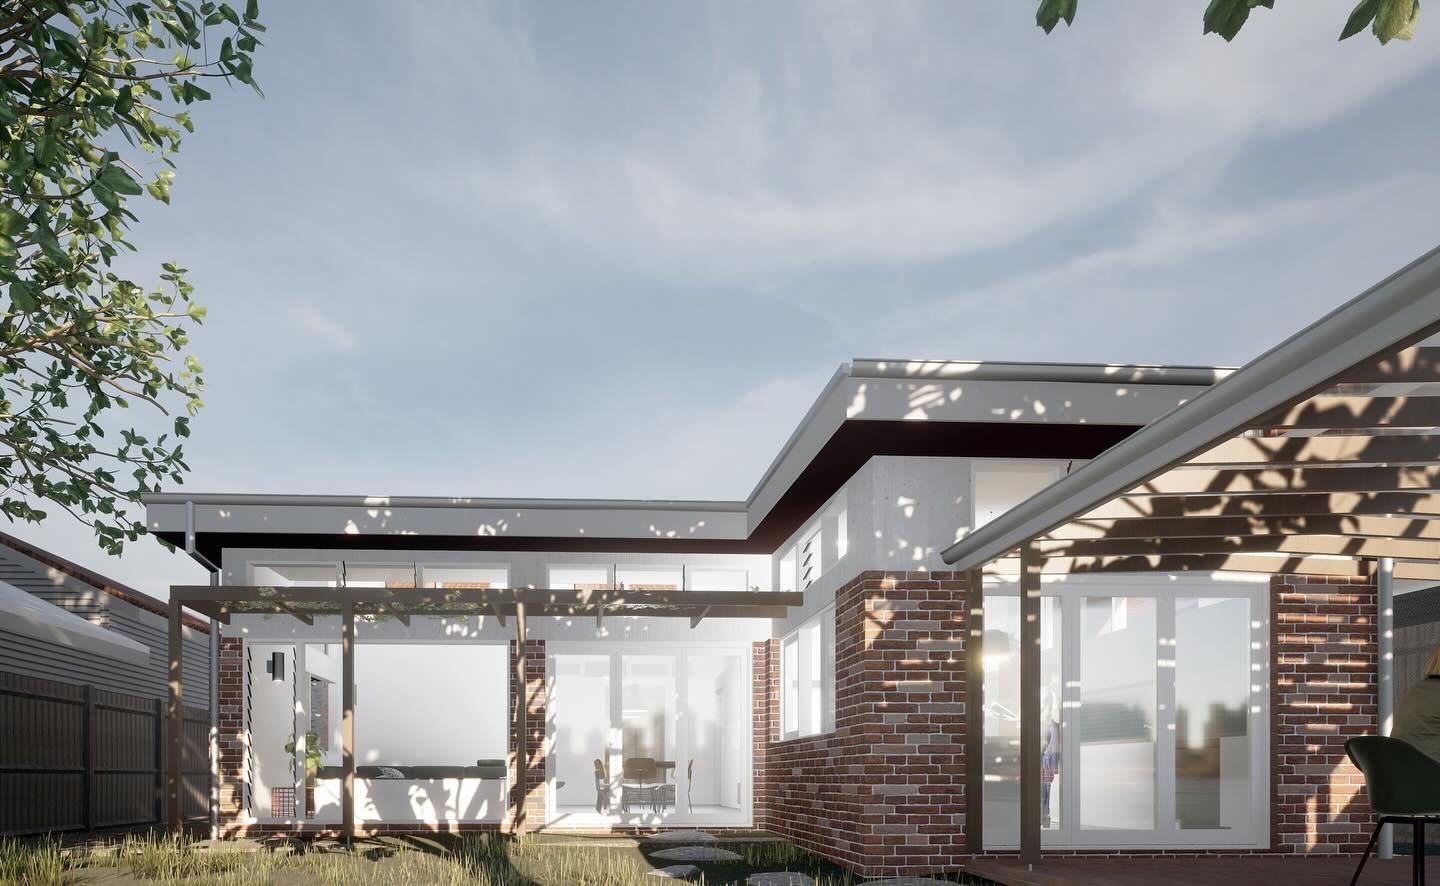 Brunswick Scoop
The rear extension is a reimagined contemporary interpretation of the original heritage building. The connection between old and new/past and present is clearly defined which also helps simplify the construction. The new roof line kic